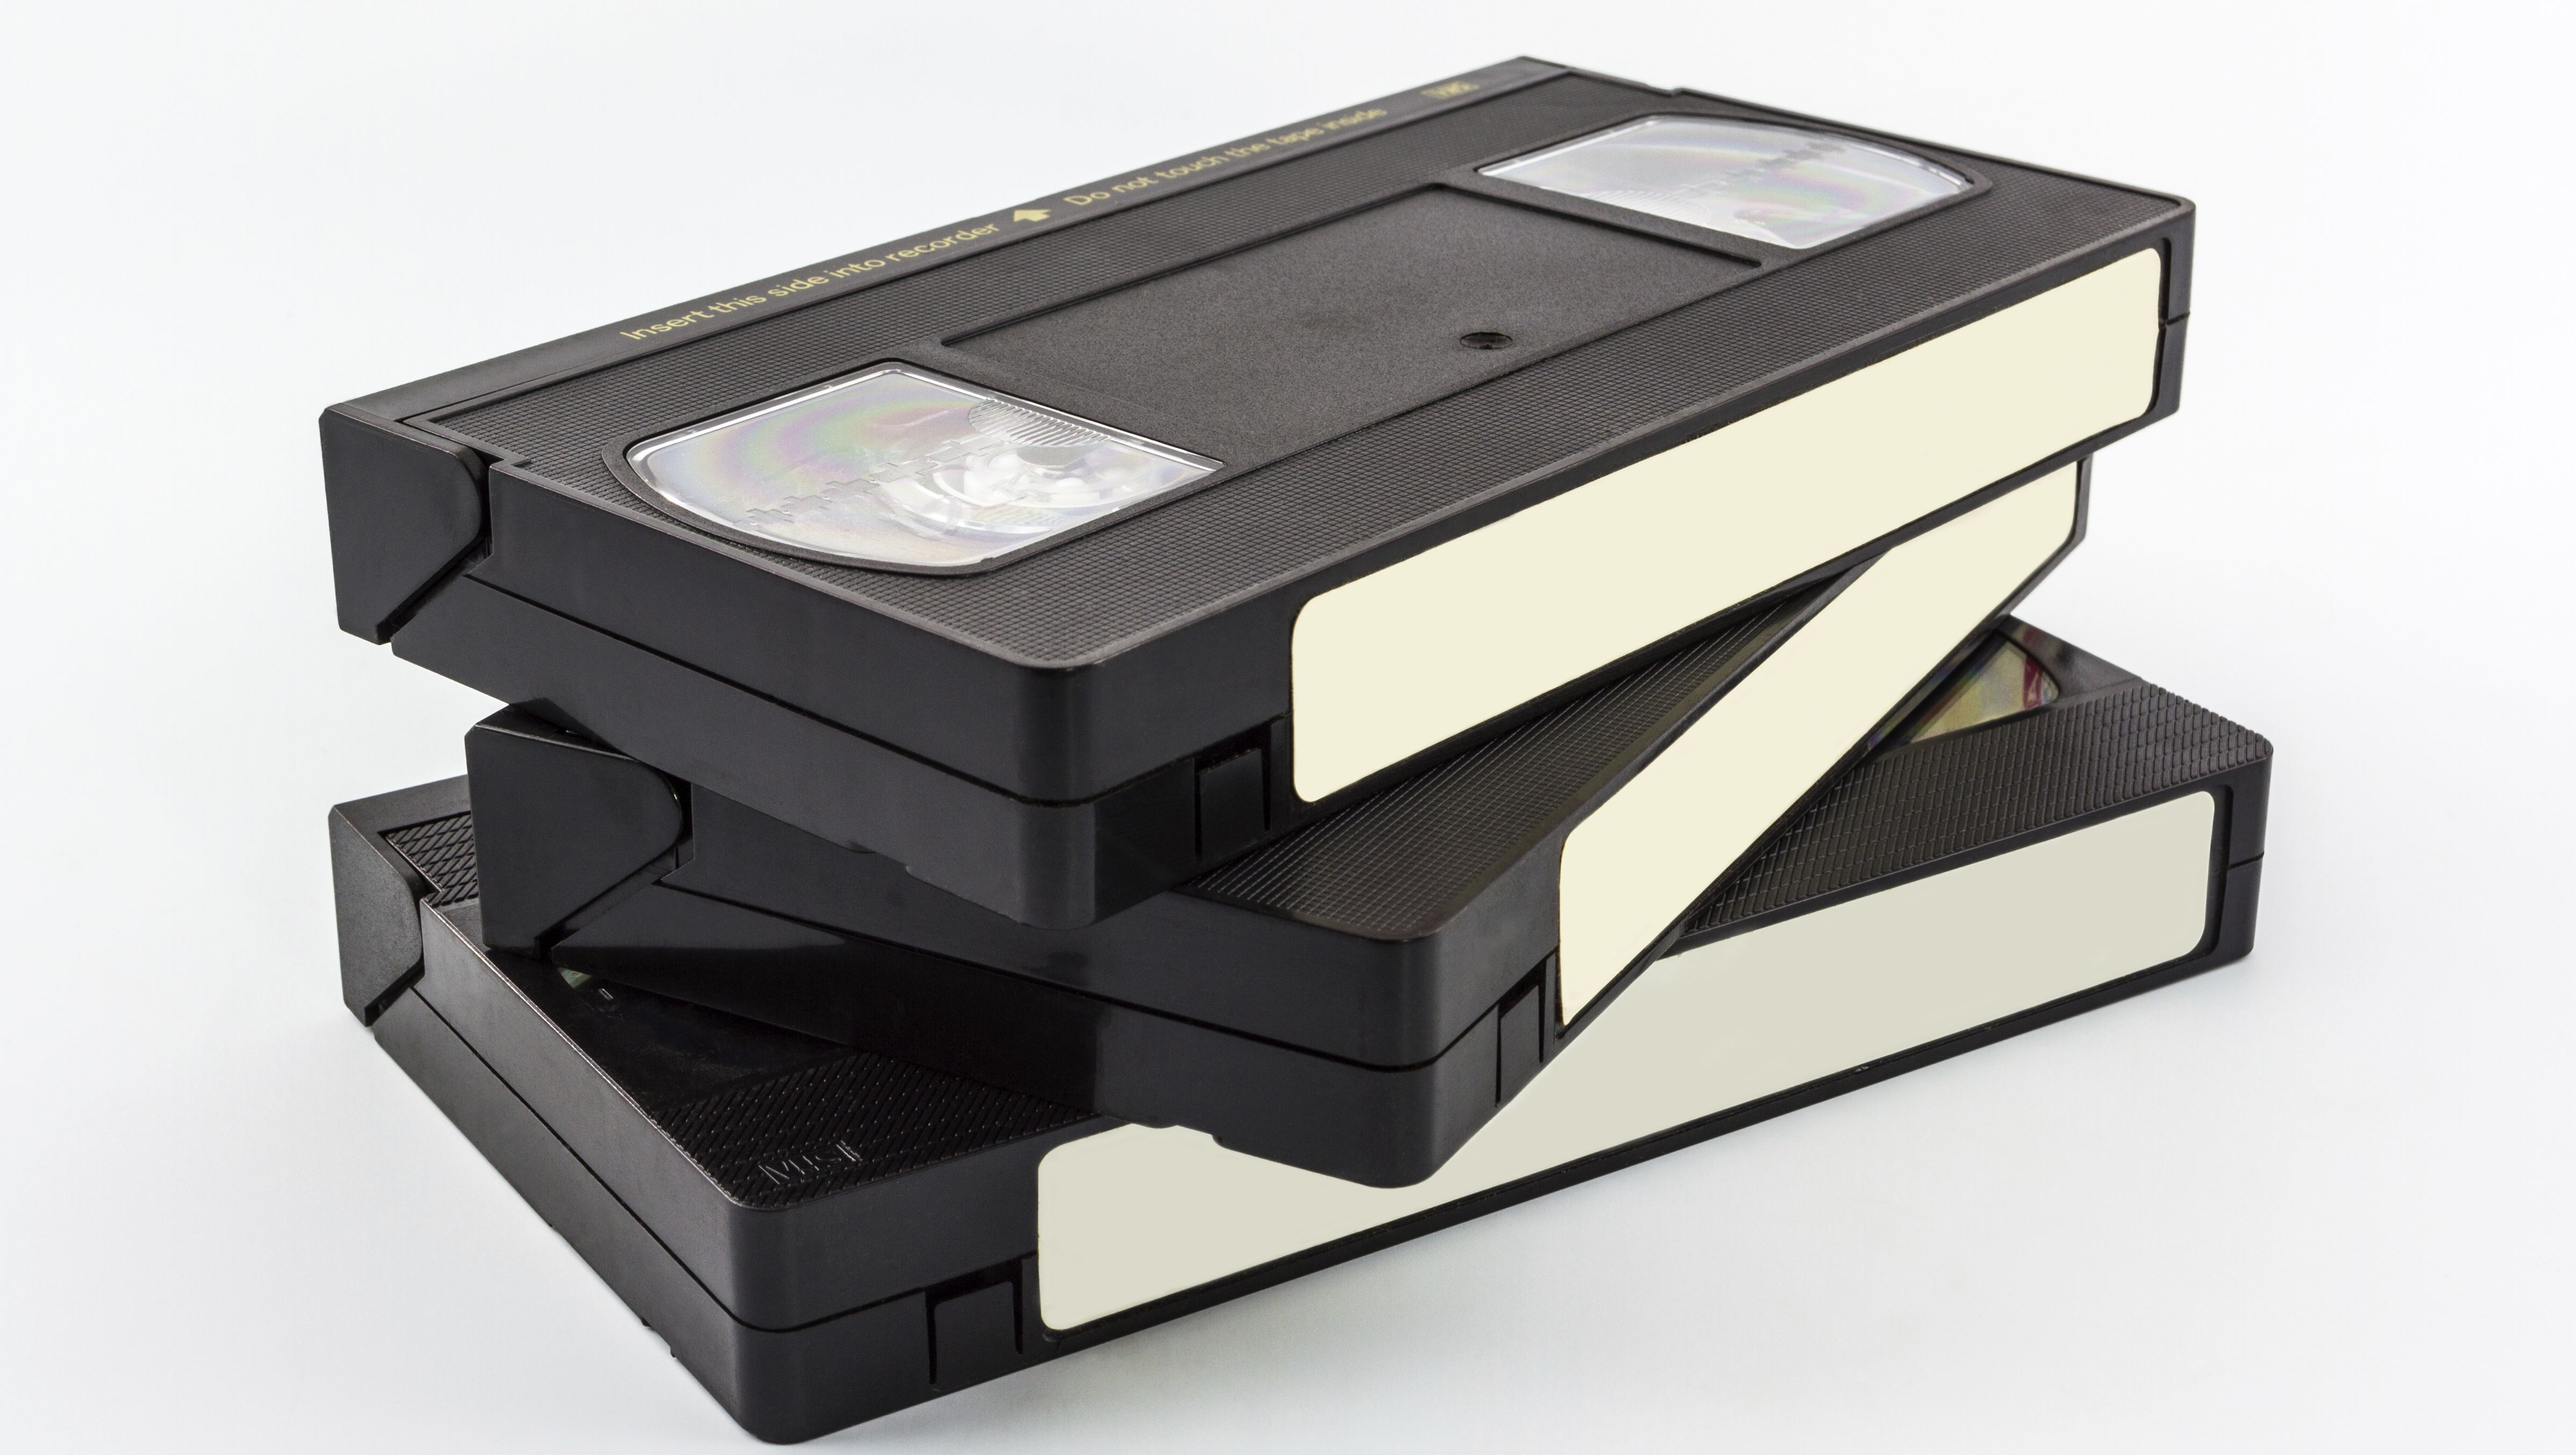 Old VHS tapes could be worth big bucks